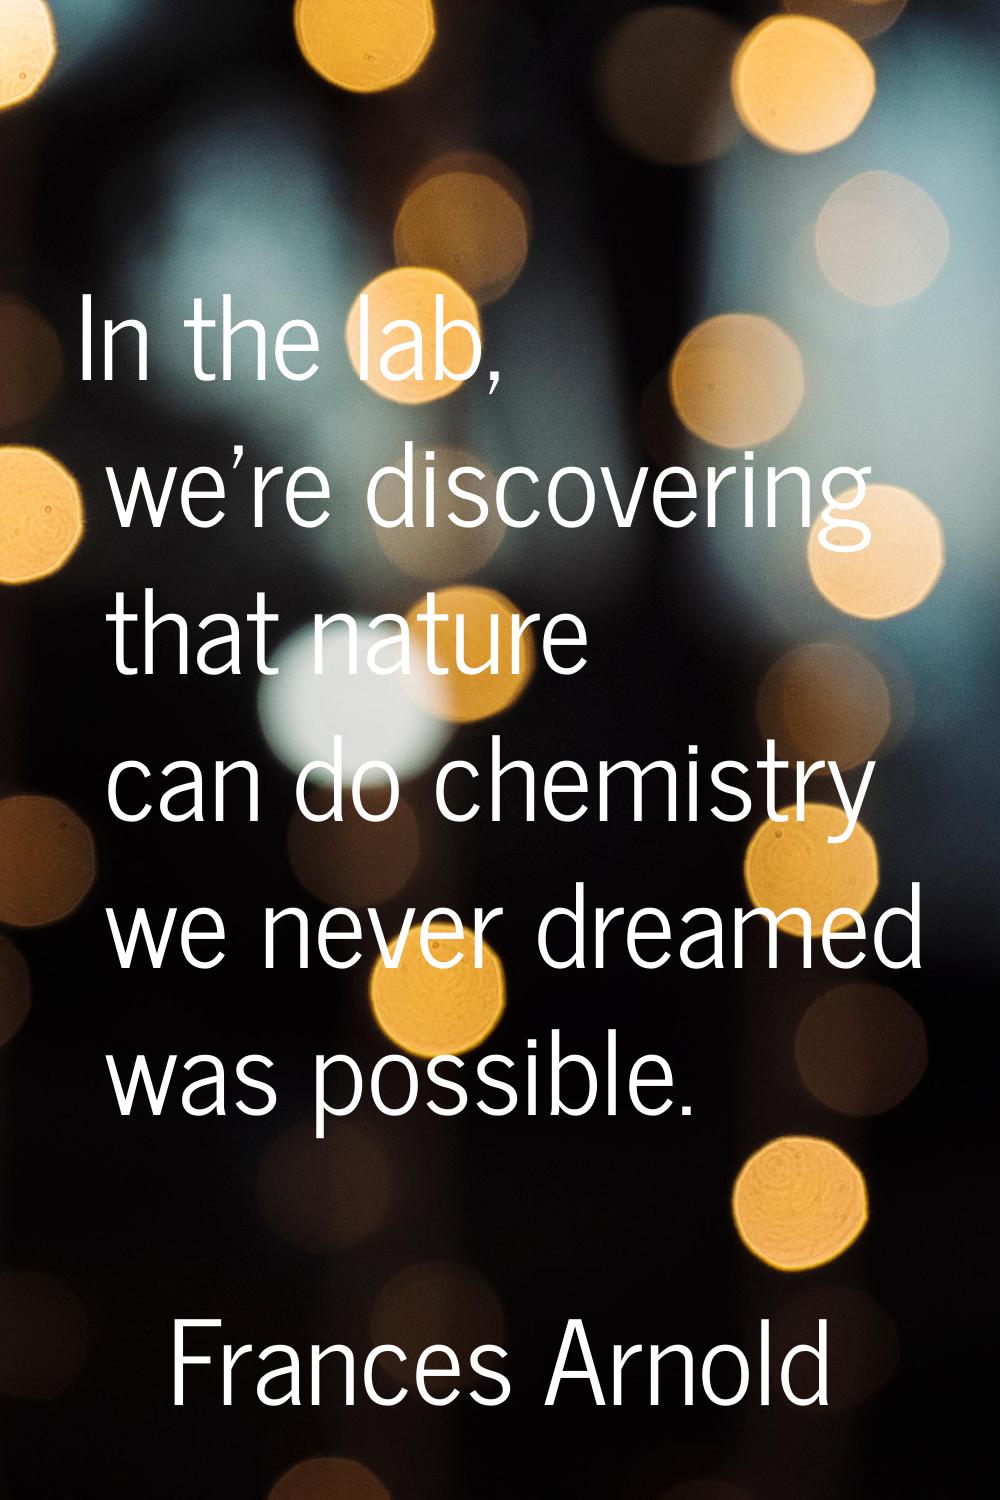 In the lab, we're discovering that nature can do chemistry we never dreamed was possible.